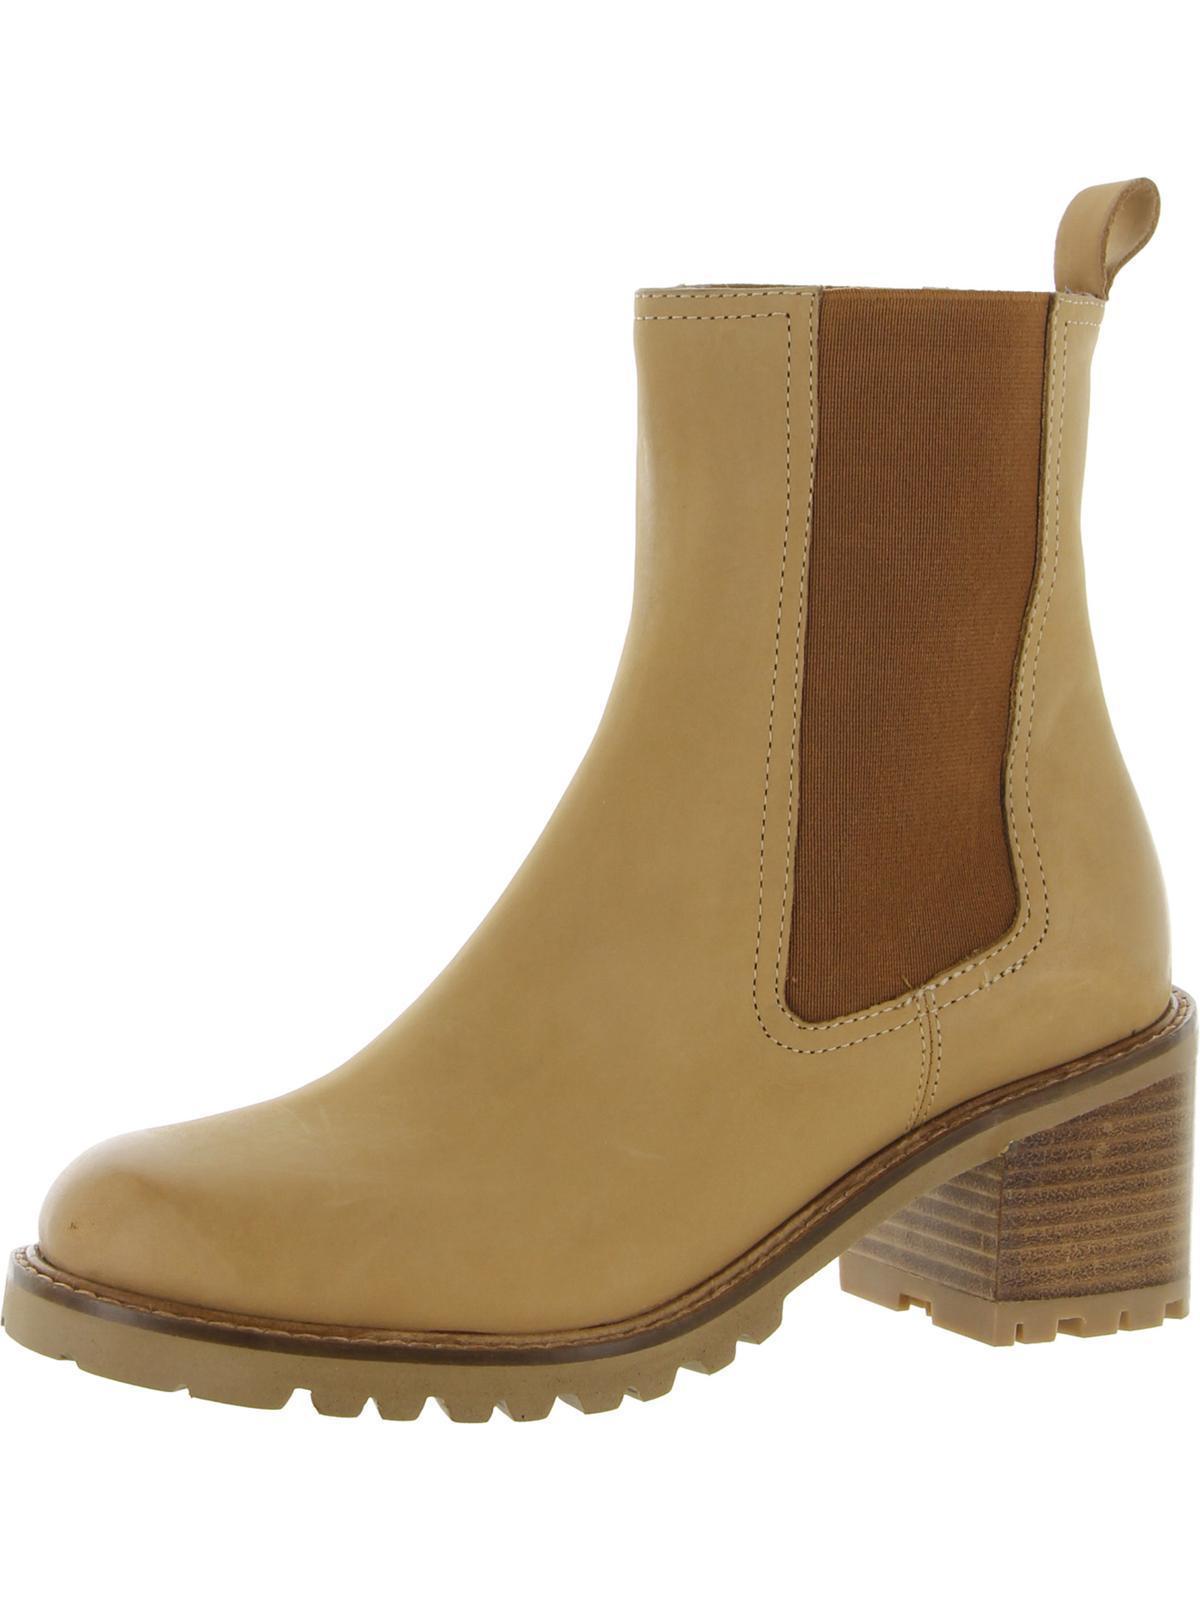 Seychelles Far-Fetched (Tan) Women's Boots Product Image